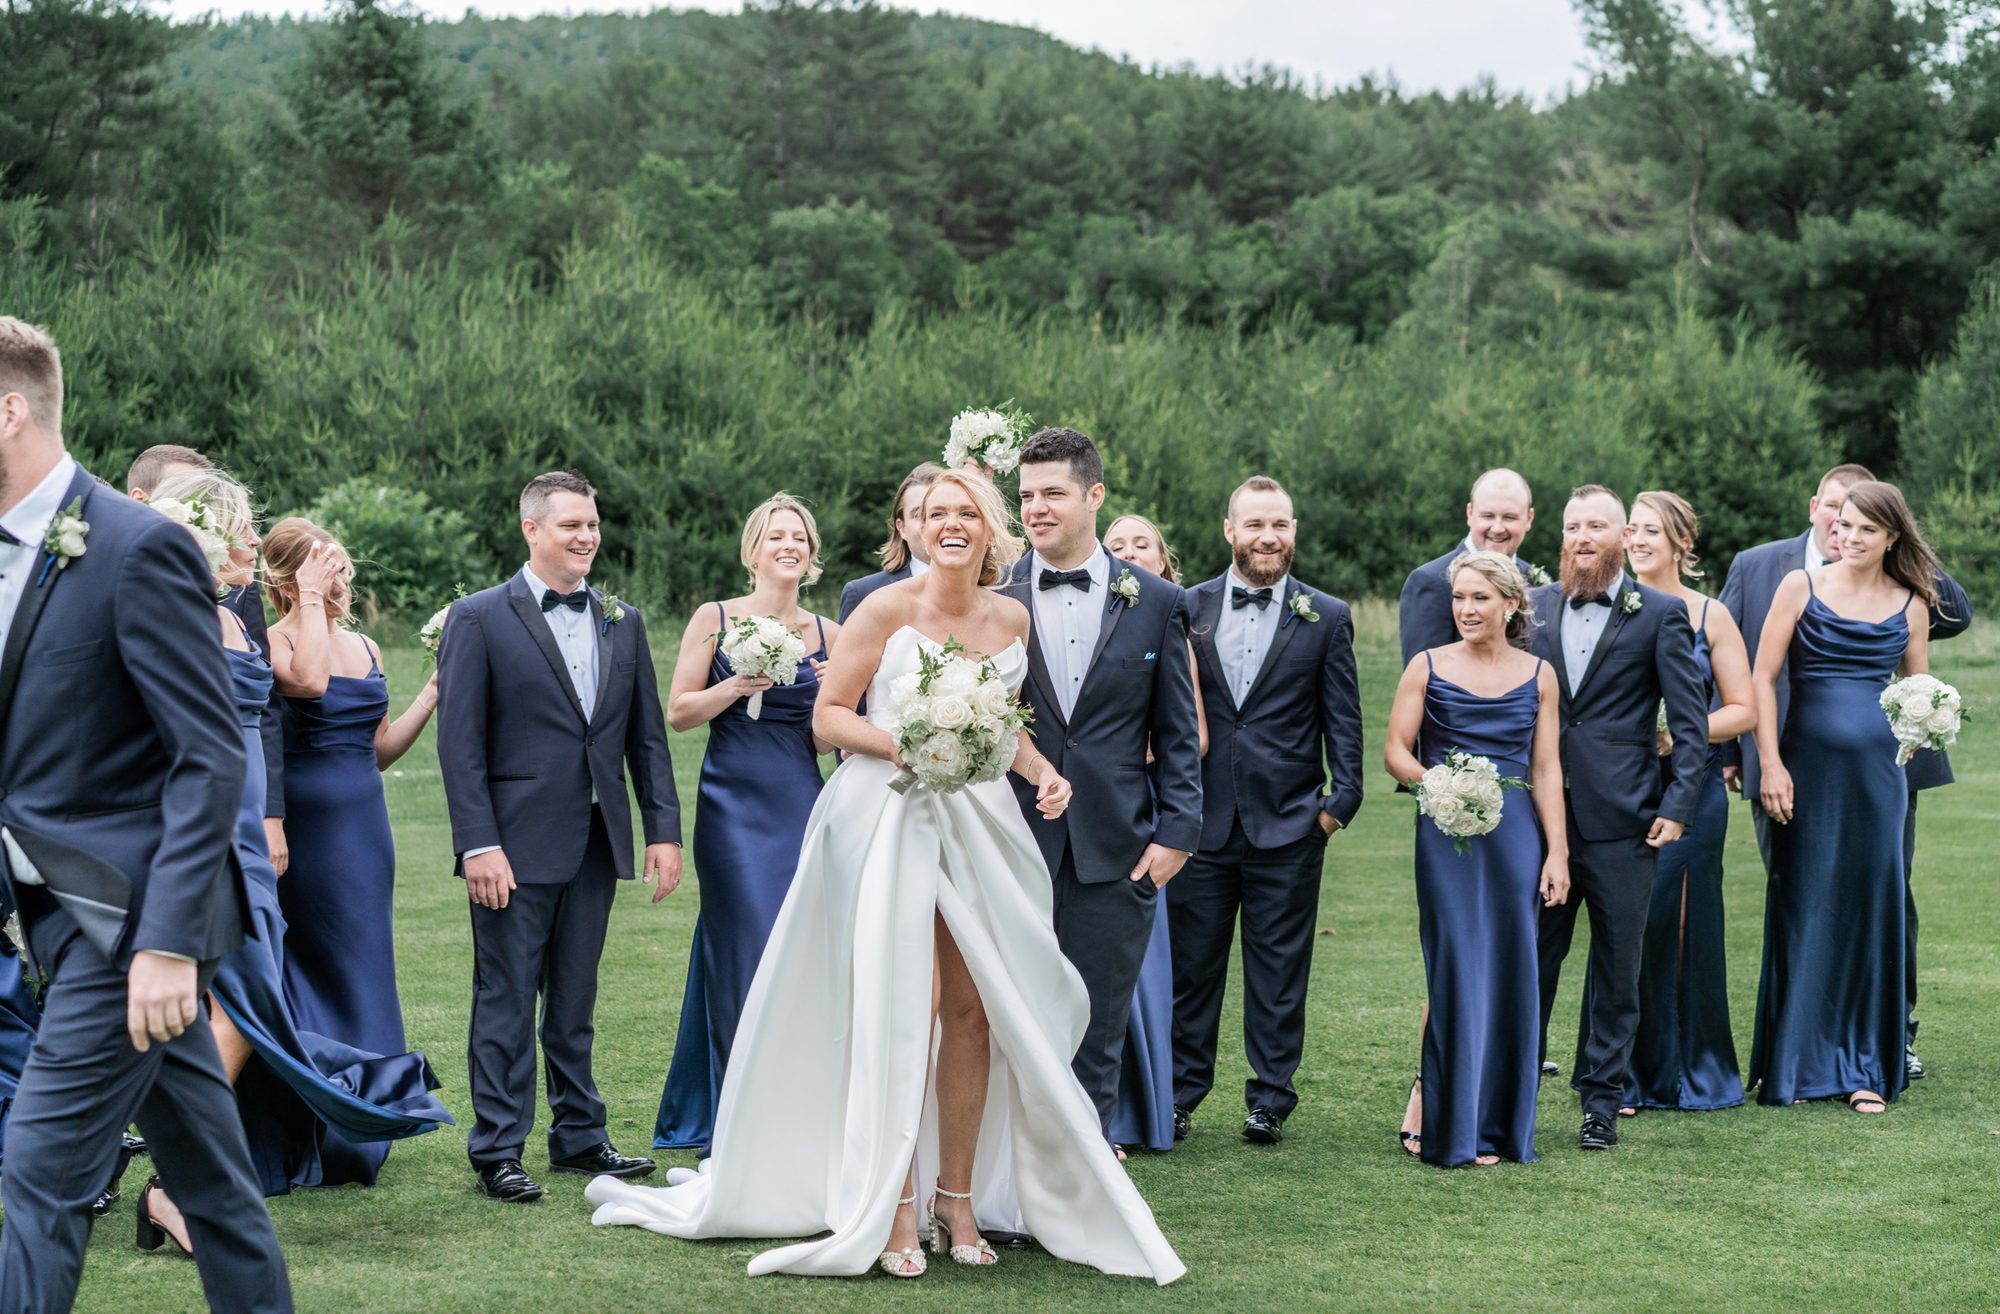 Whitney & Andy - Cronin's Golf Course